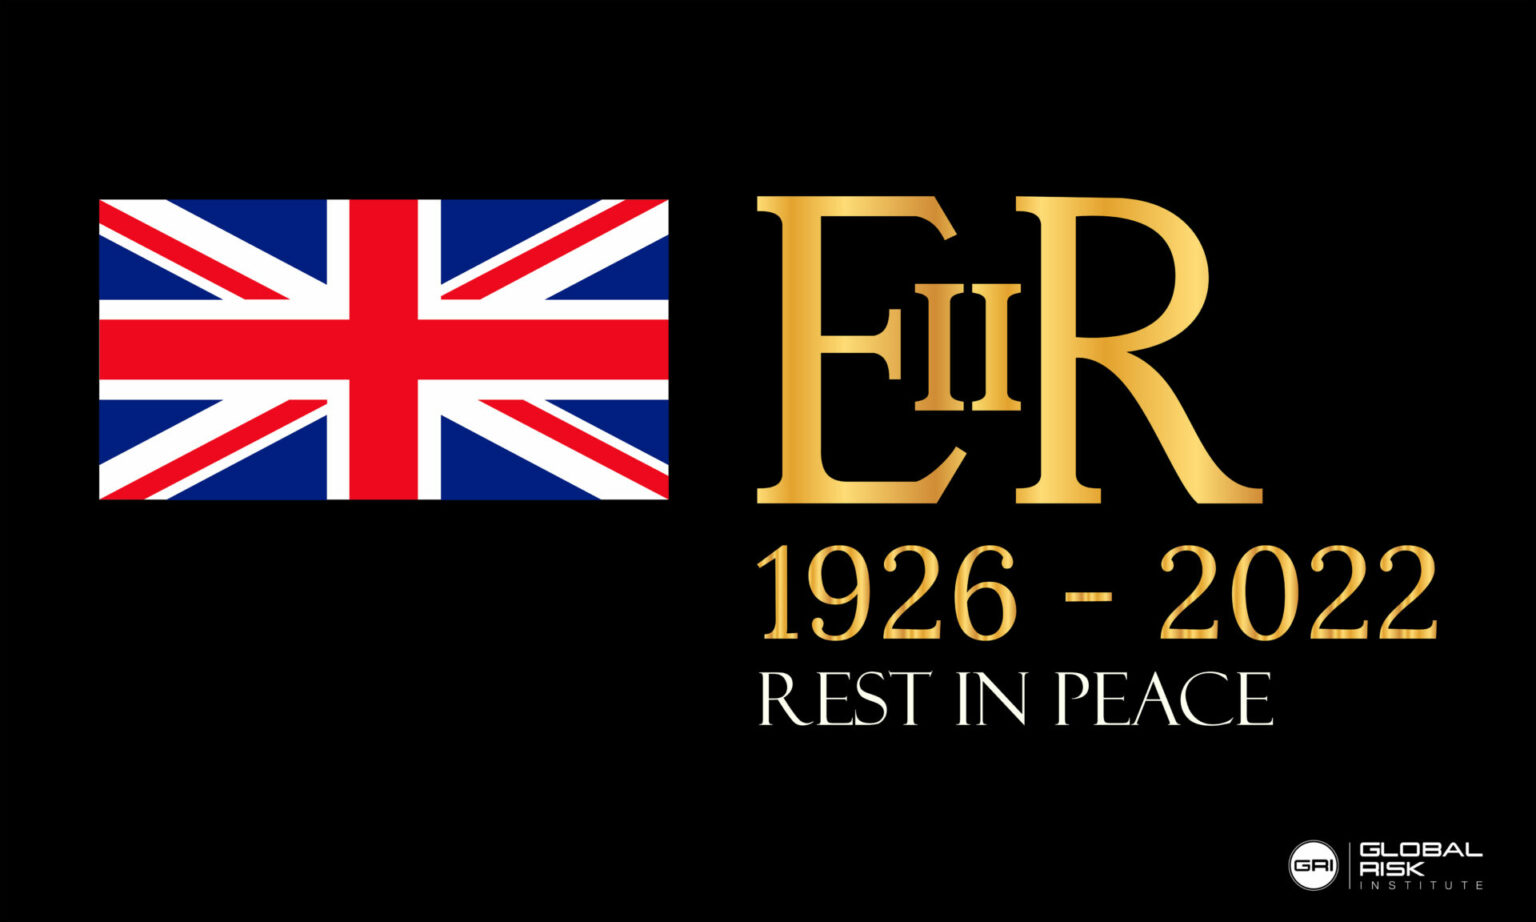 Graphic to pay respects to Queen Elizabeth II. Reads 19-26-2022 Rest In Peace